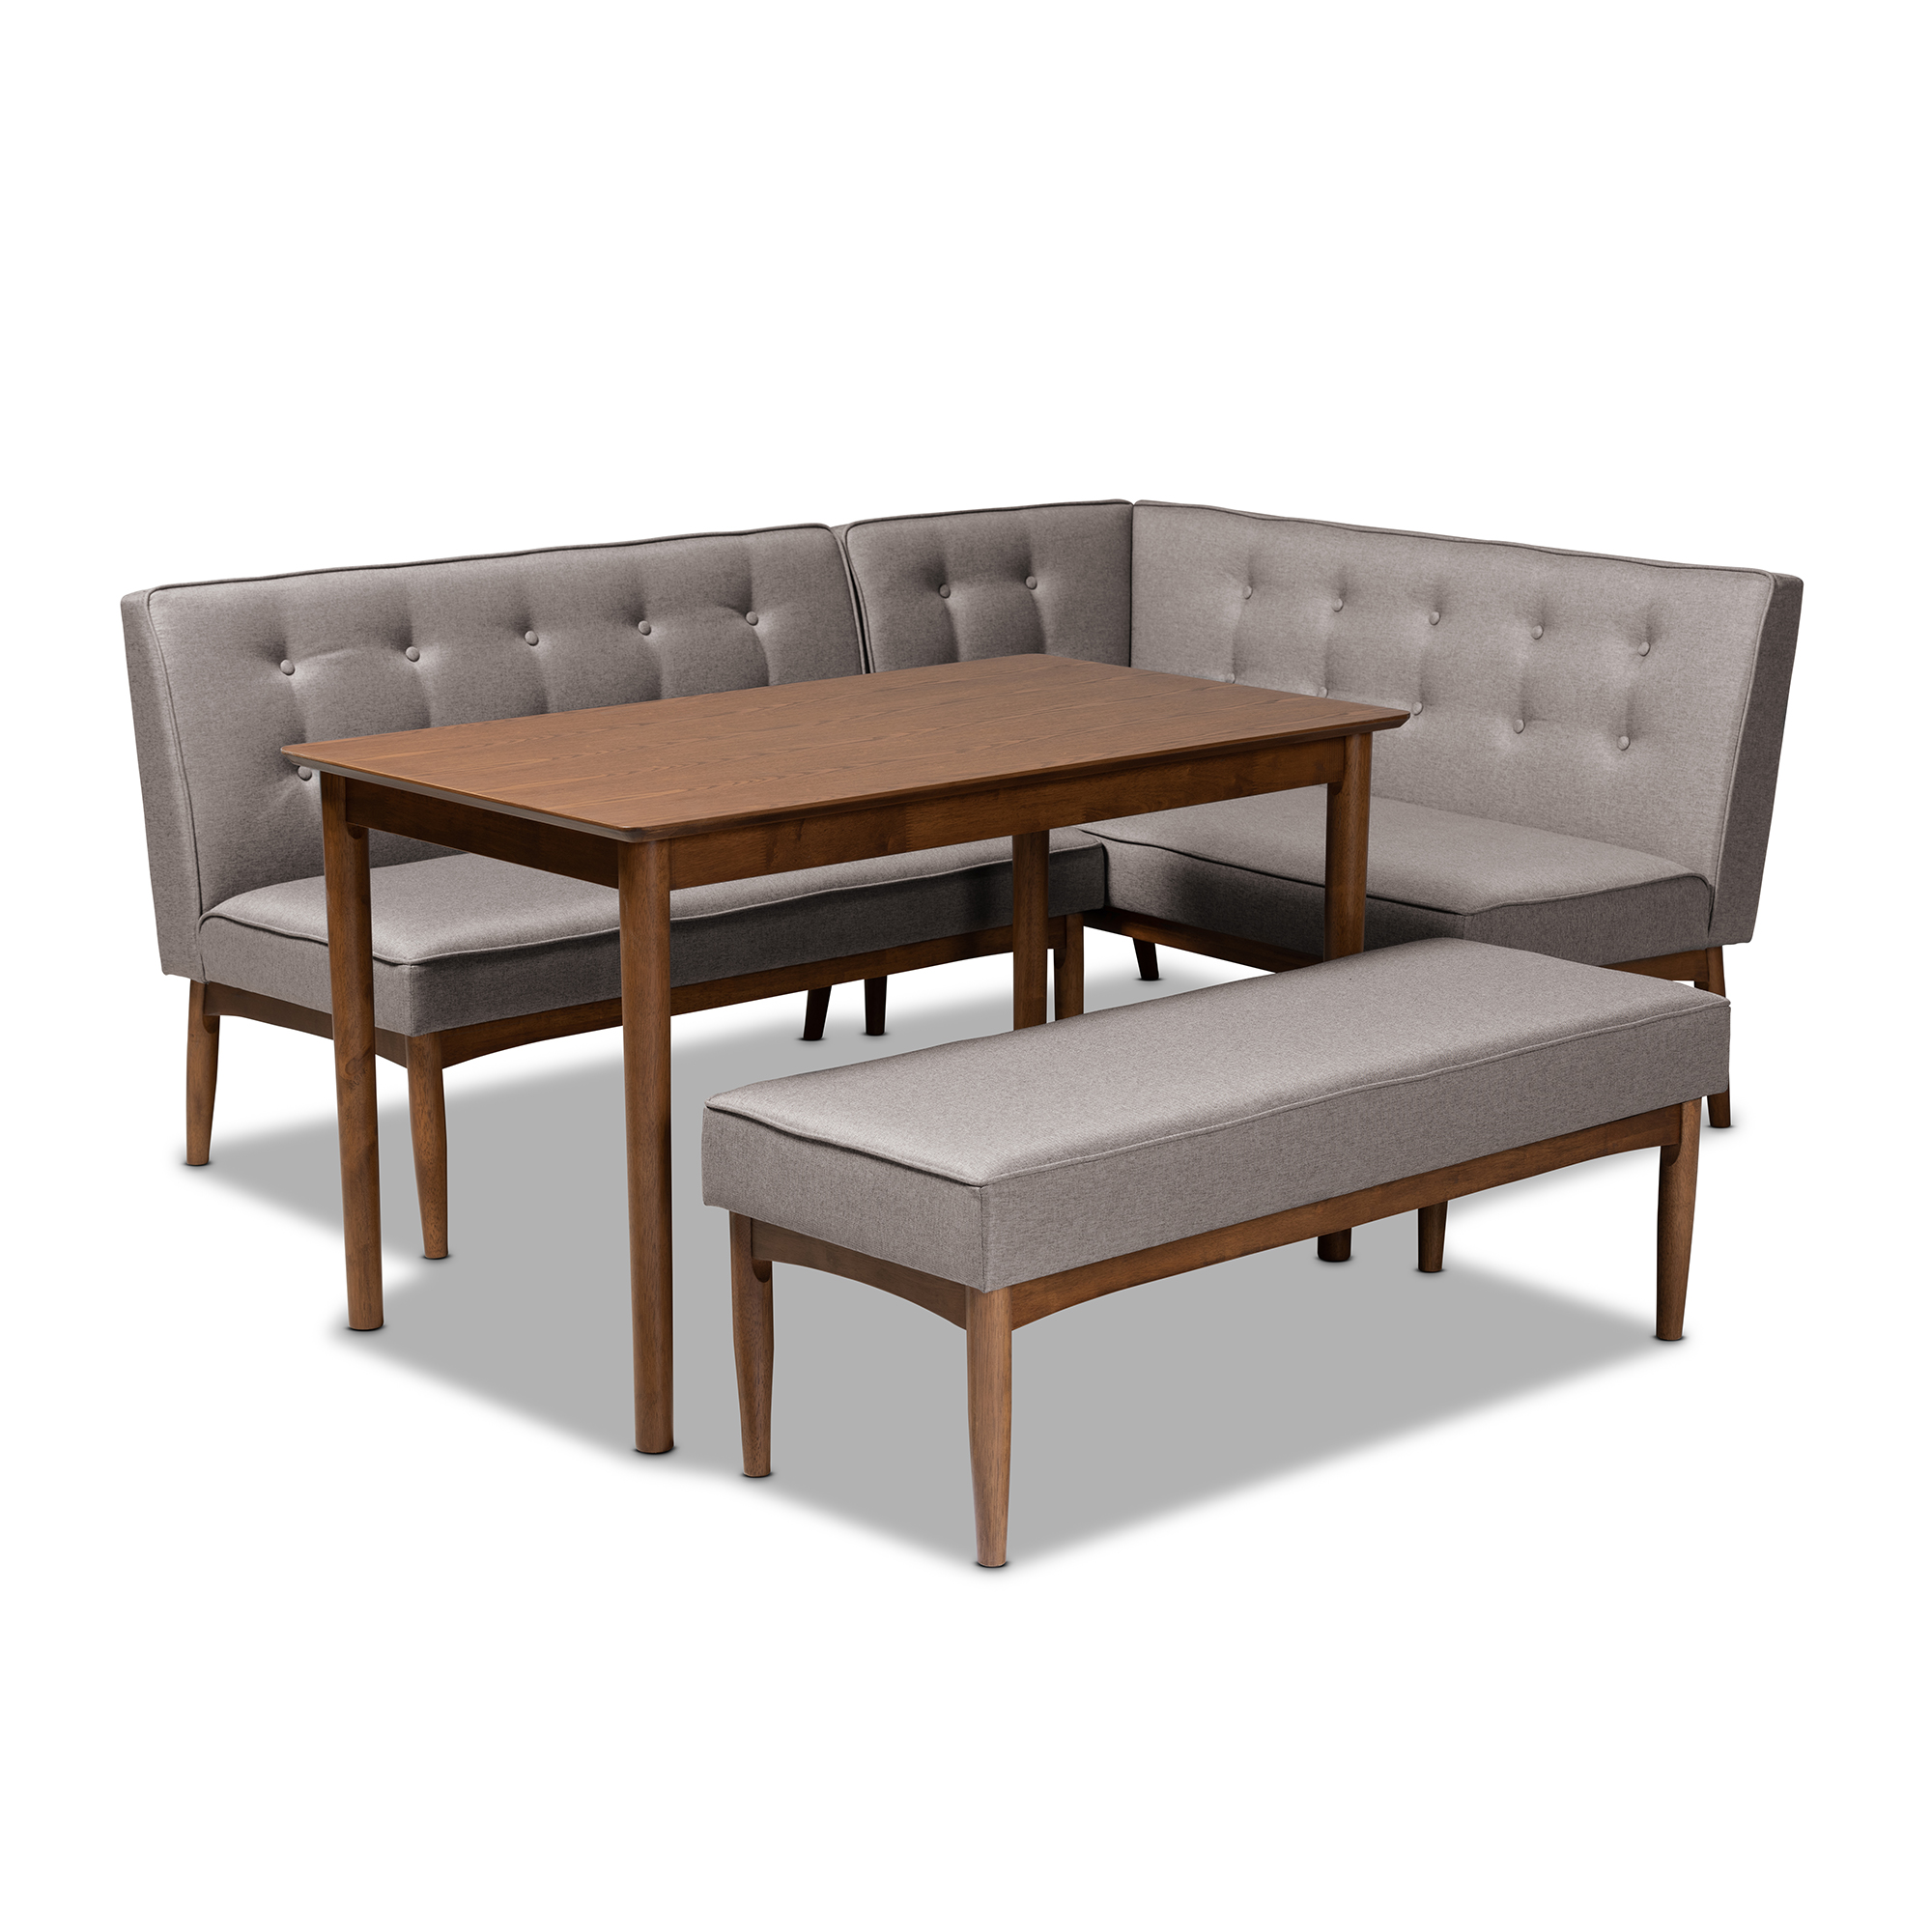 Baxton Studio Arvid Mid-Century Modern Gray Fabric Upholstered 4-Piece Wood Dining Nook Set Affordable modern furniture in Chicago, classic dining room furniture, modern dining sets, cheap dining sets